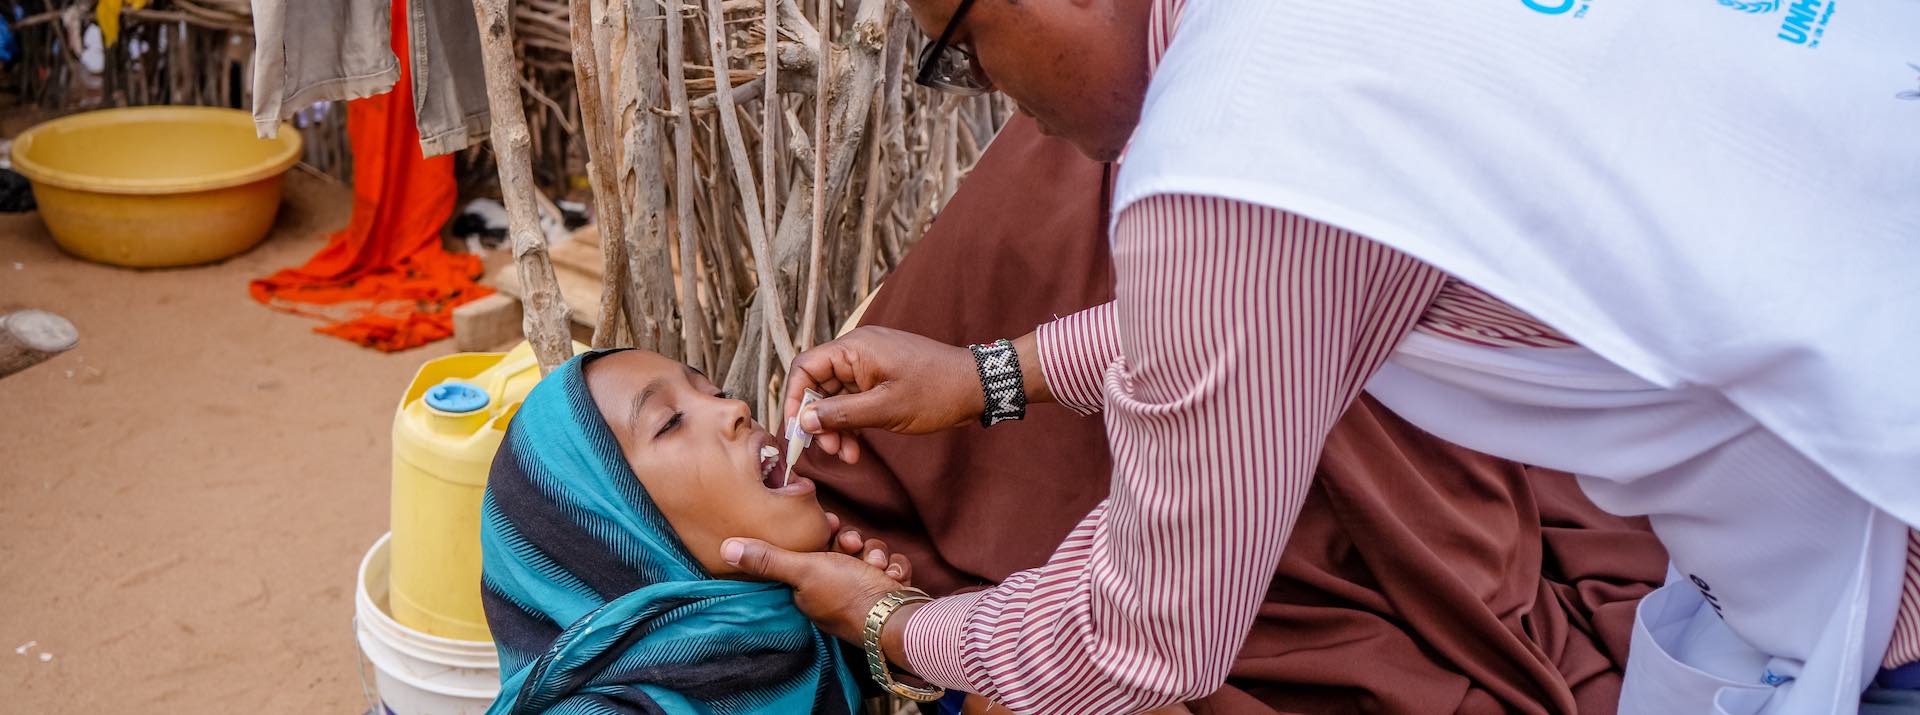 Africa needs to vaccinate 33 million children to put progress back on track